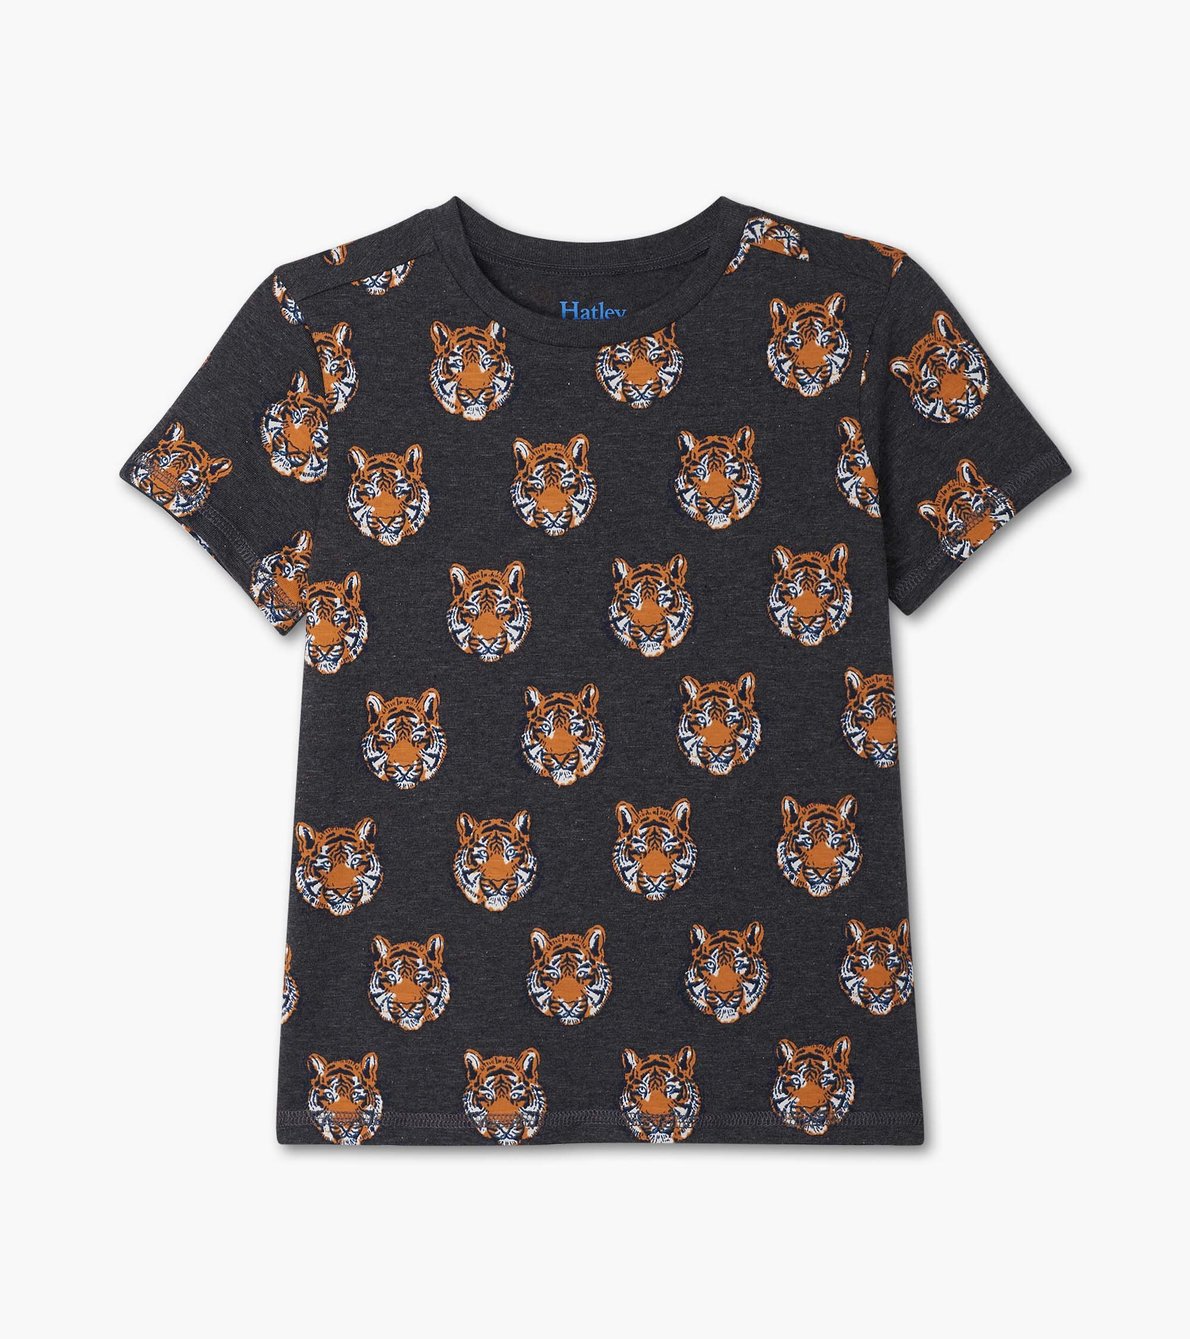 View larger image of Fierce Tigers Graphic Tee